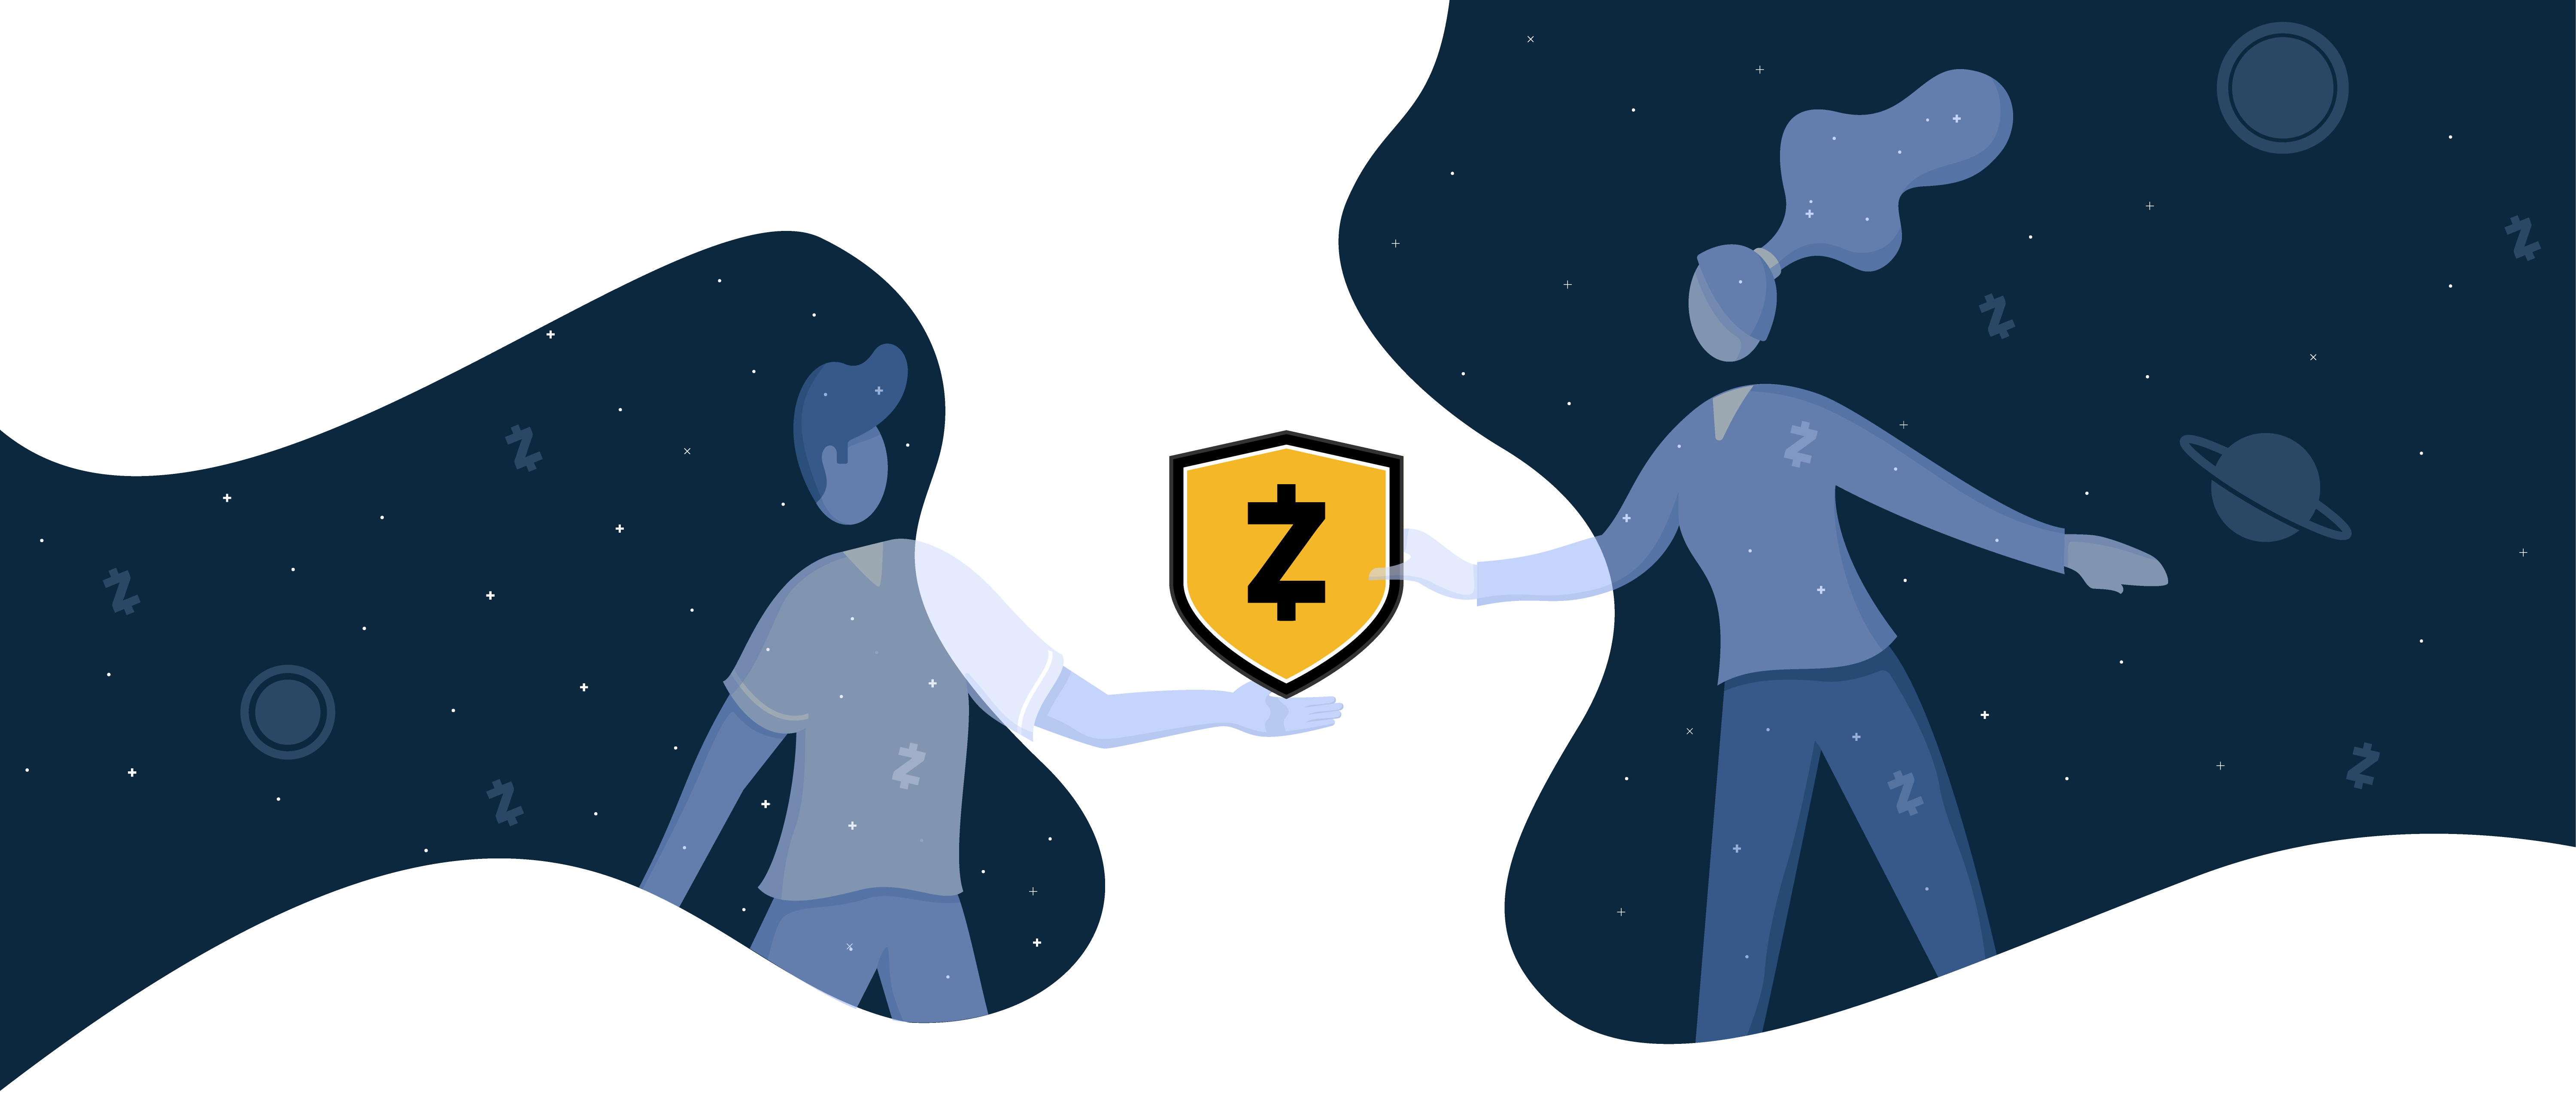 An illustration of a man and woman reaching out towards a Zcash shield logo